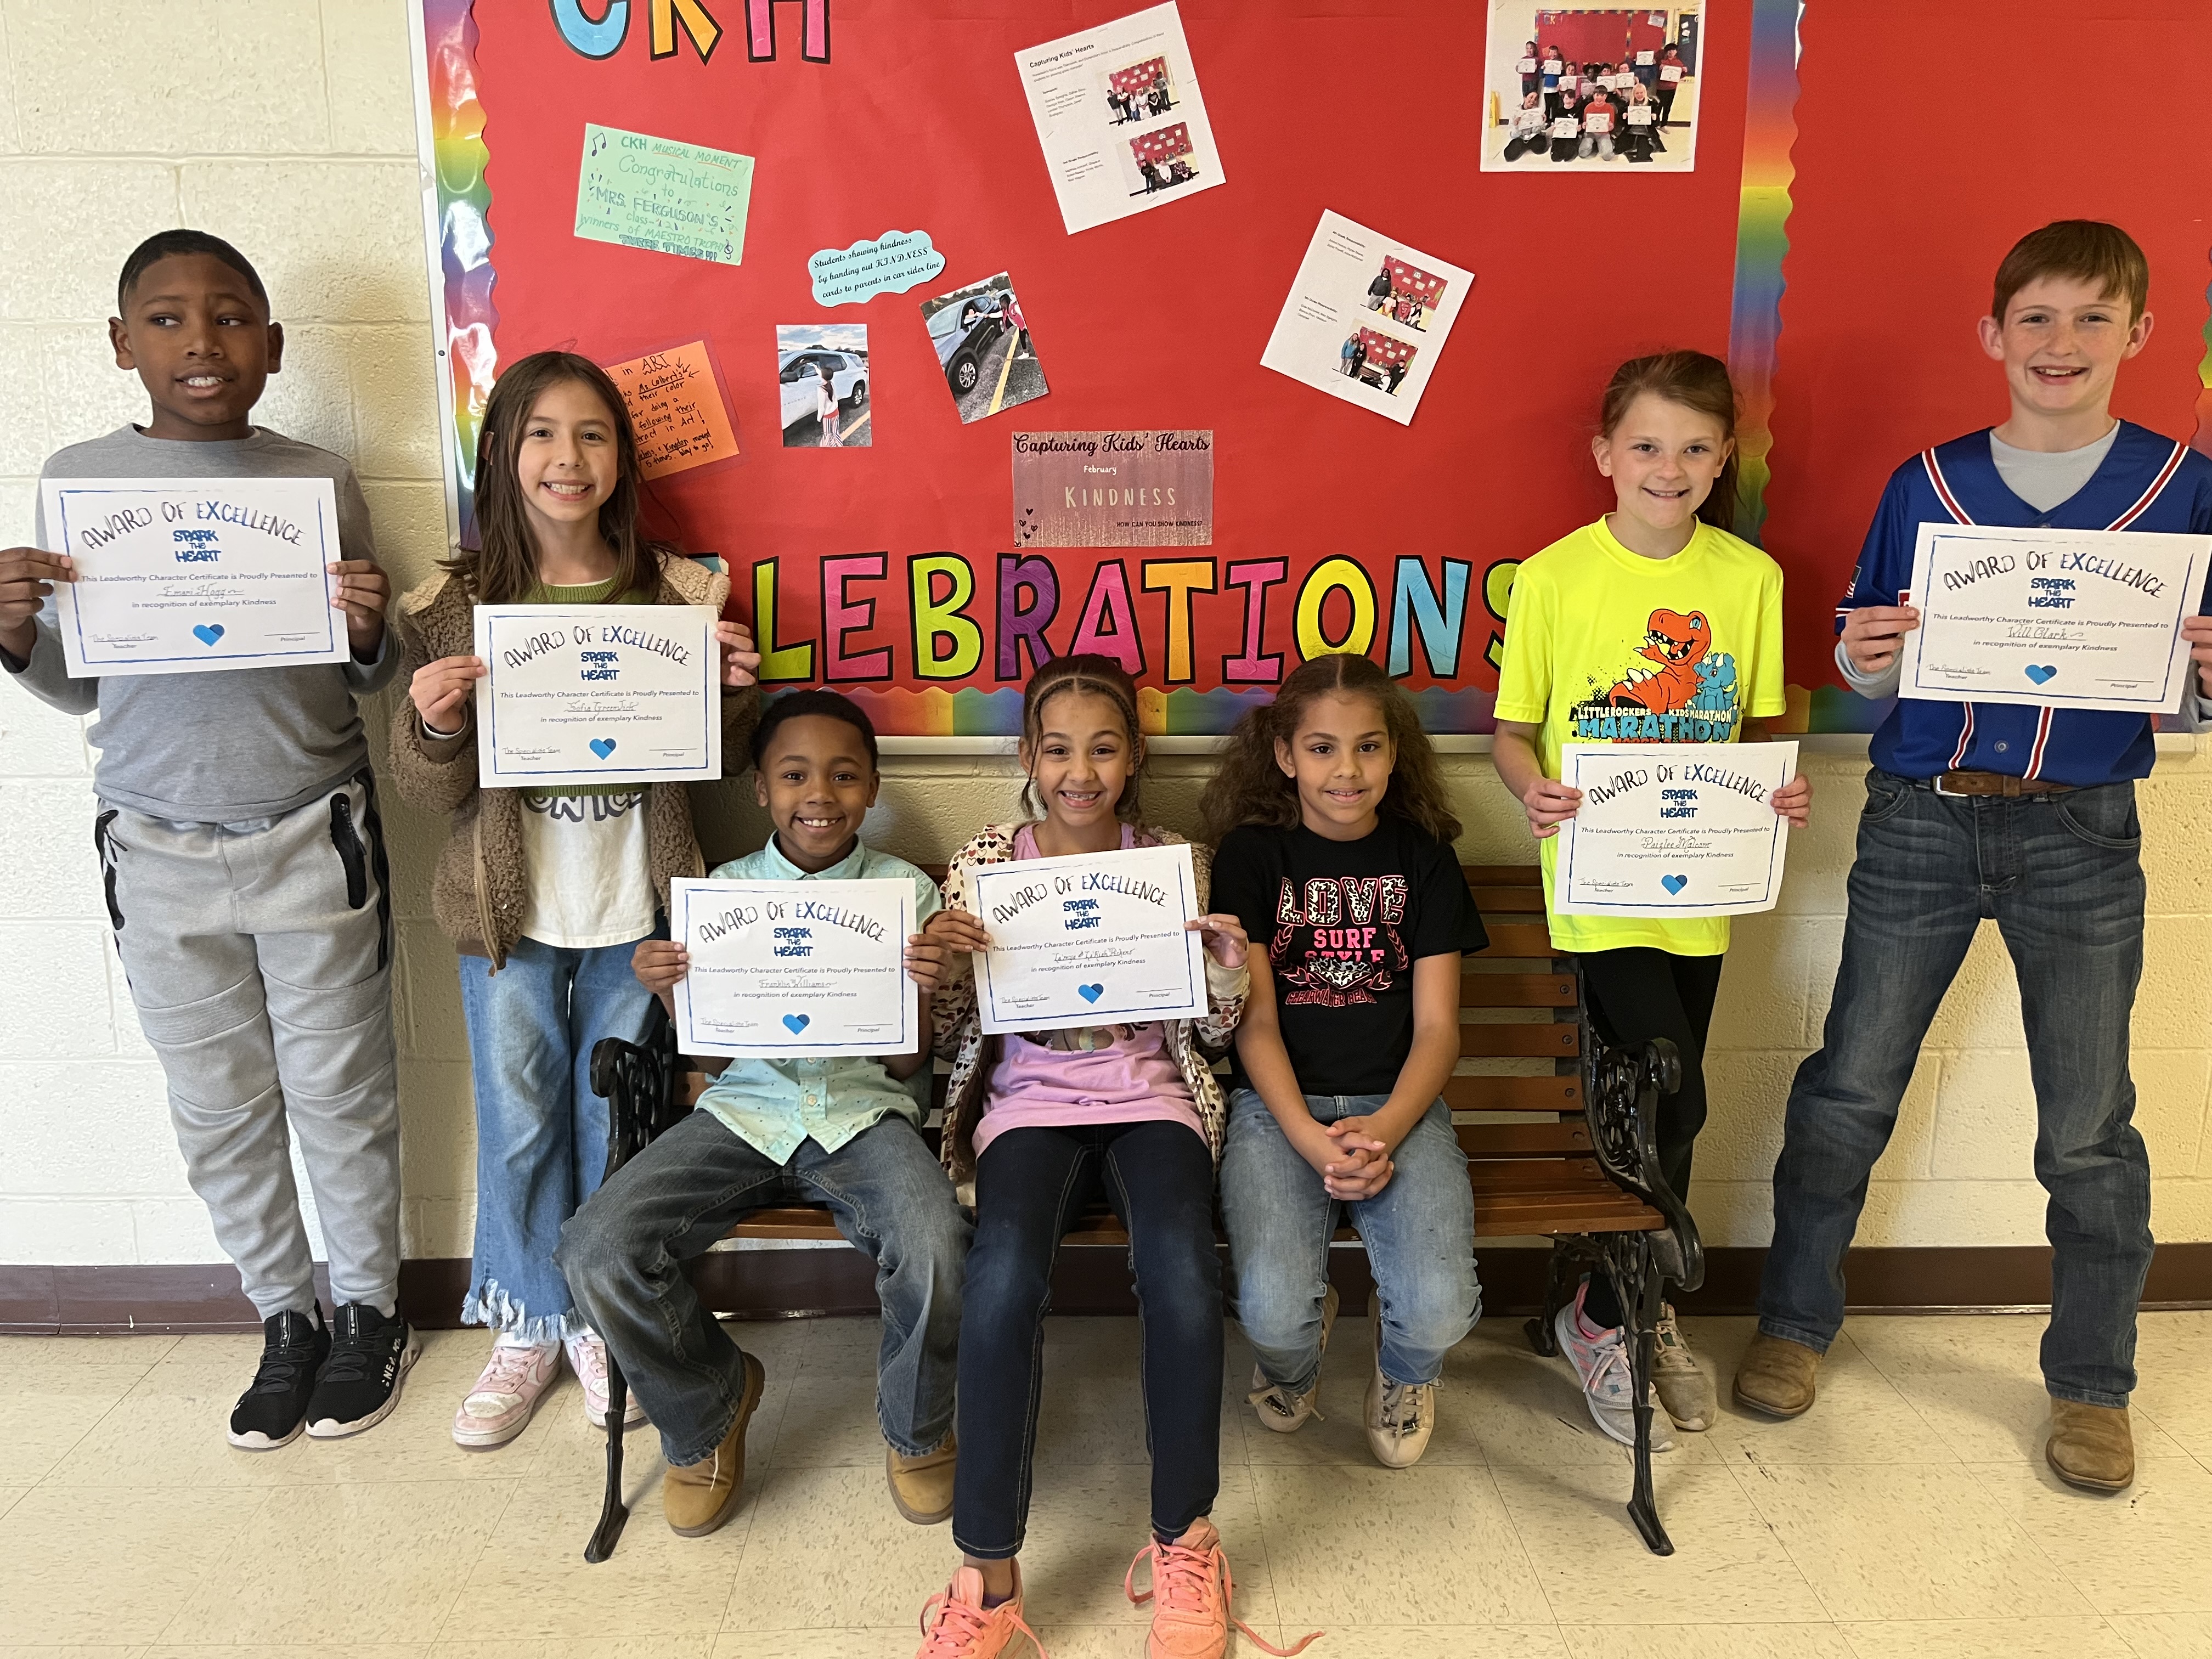 Kindness winners smiling at the camera holding their certificates